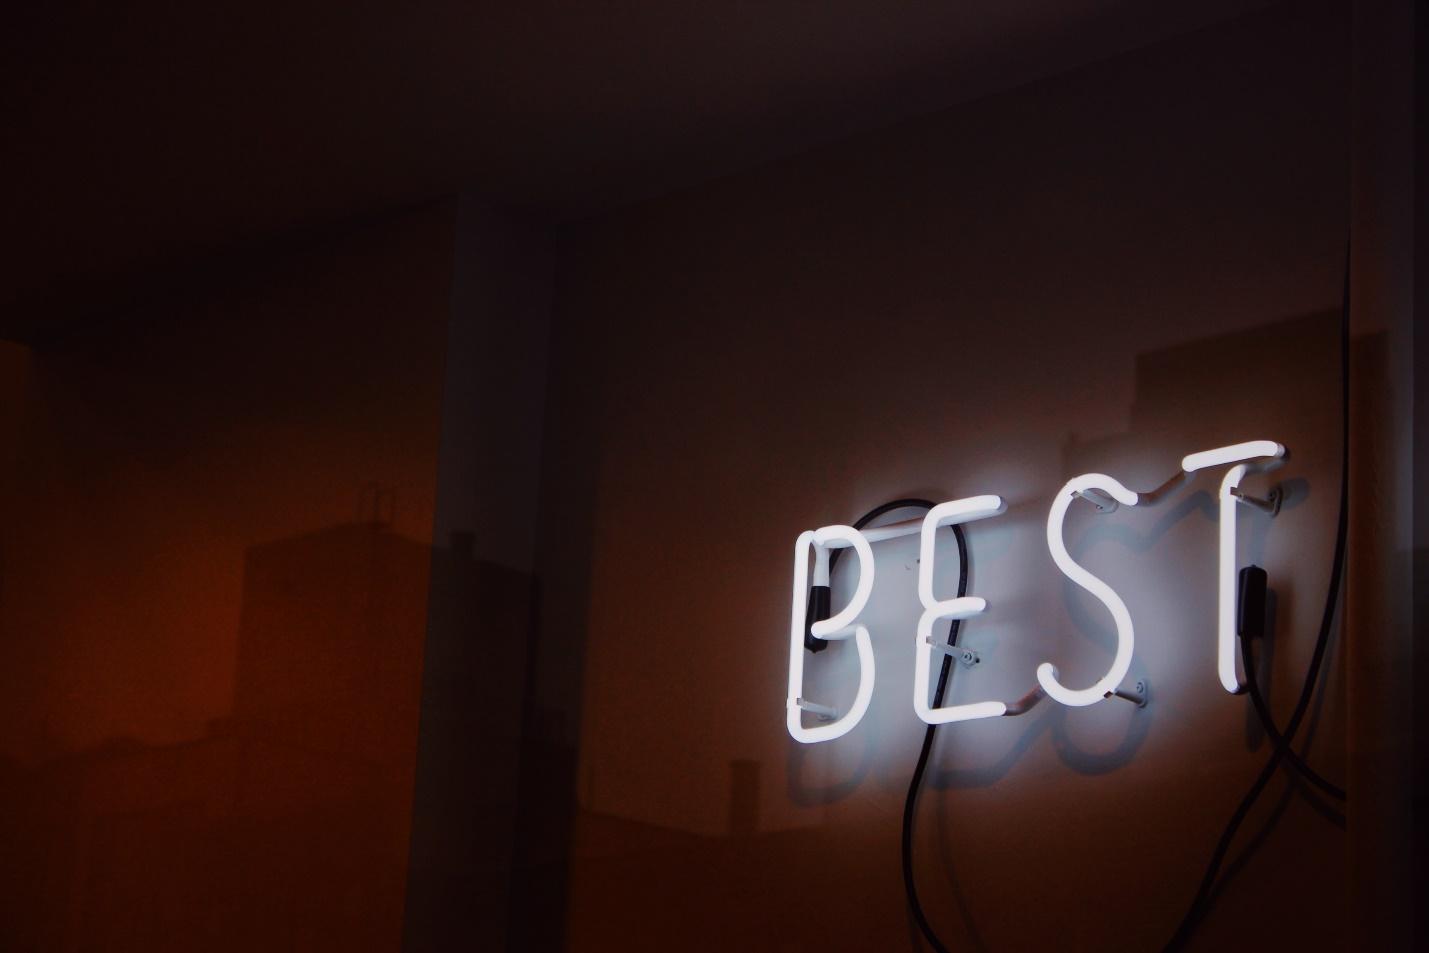 A neon sign on a wall that says "best"